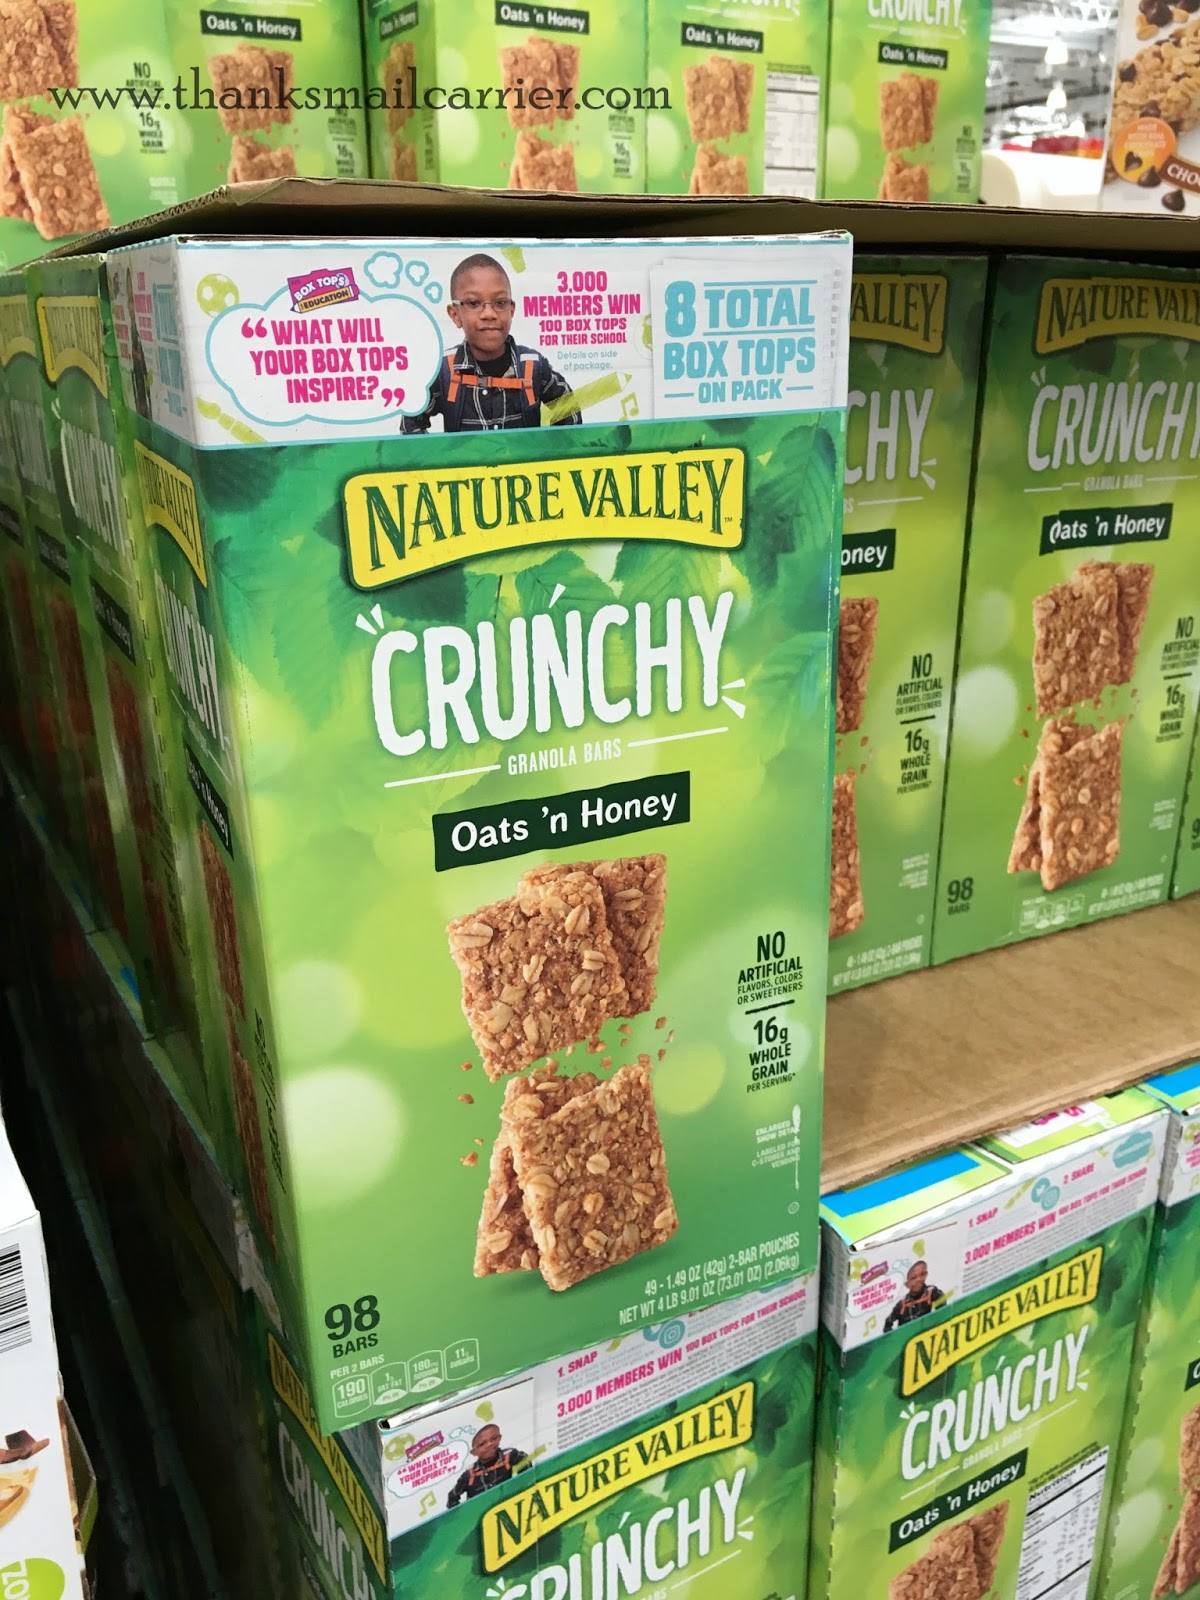 Nature Valley crunchy bars